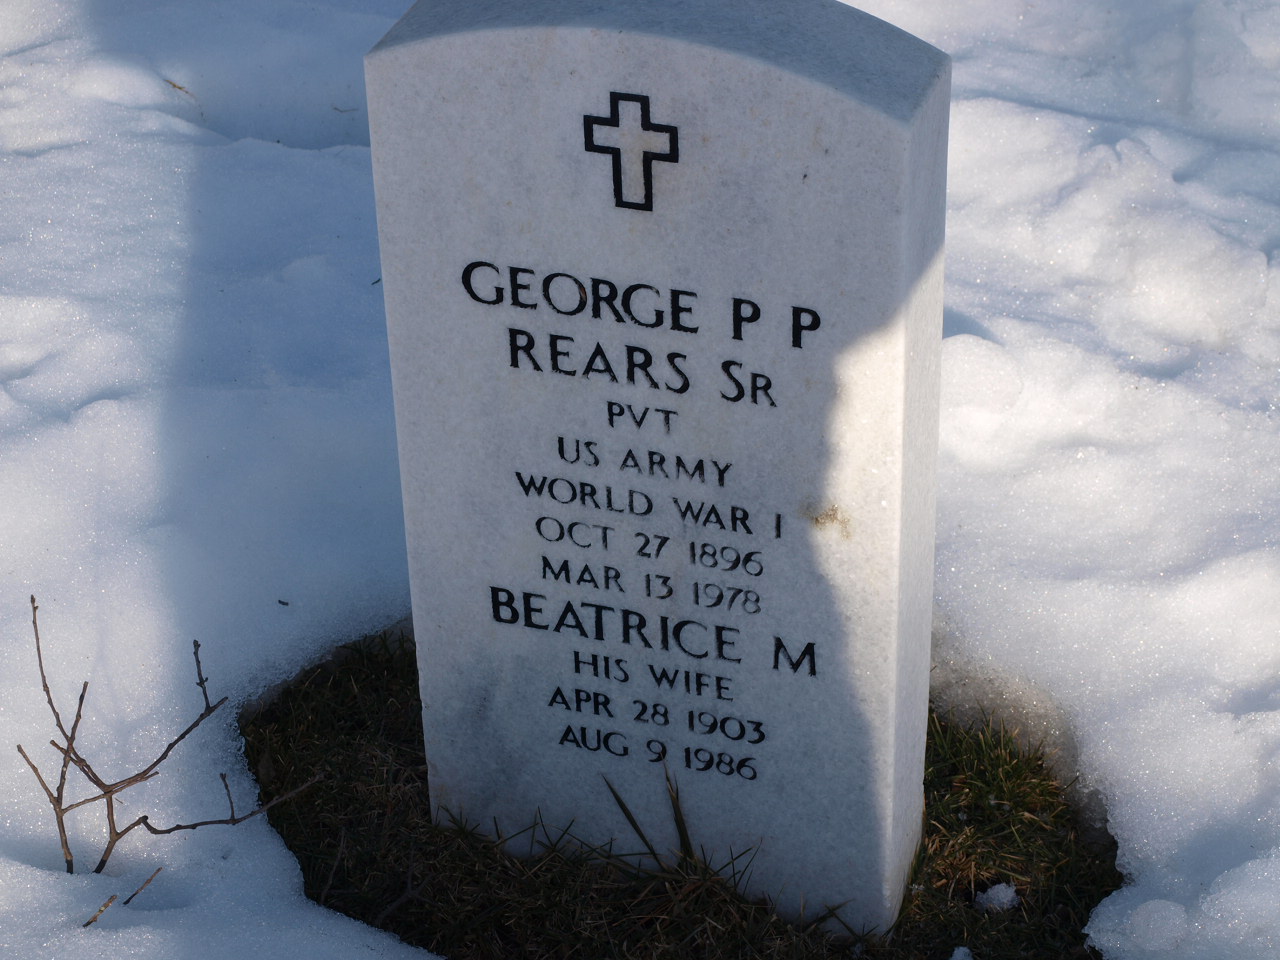 The Beverly National Cemetery headstone of George and Beatrice Rears